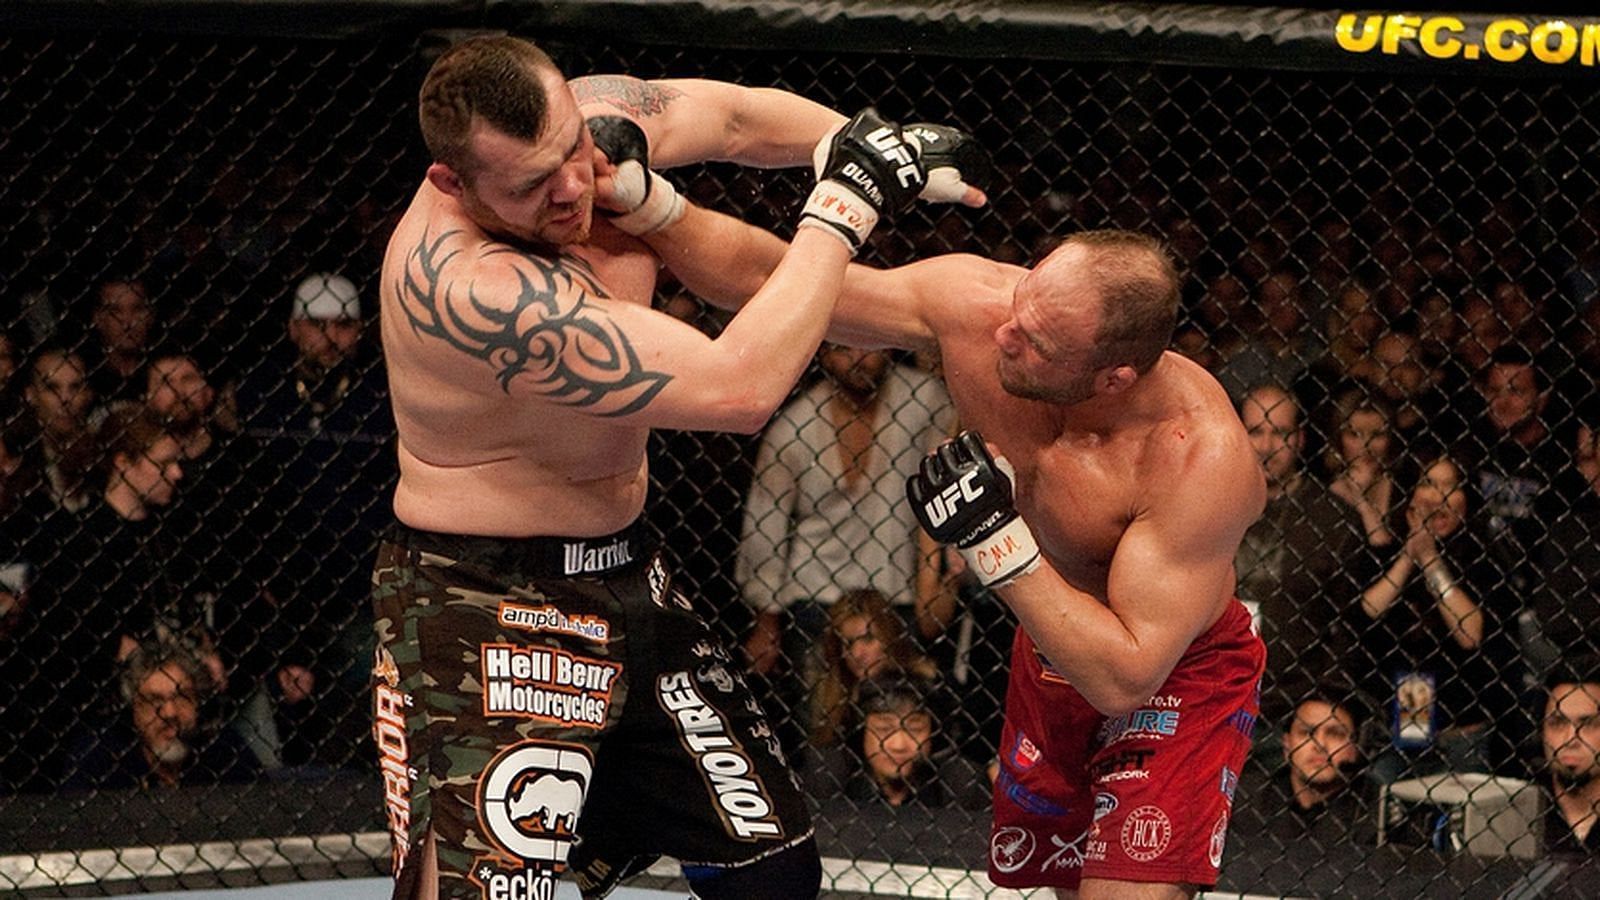 When Randy Couture beat Tim Sylvia, he changed the trajectory of the UFC heavyweight division